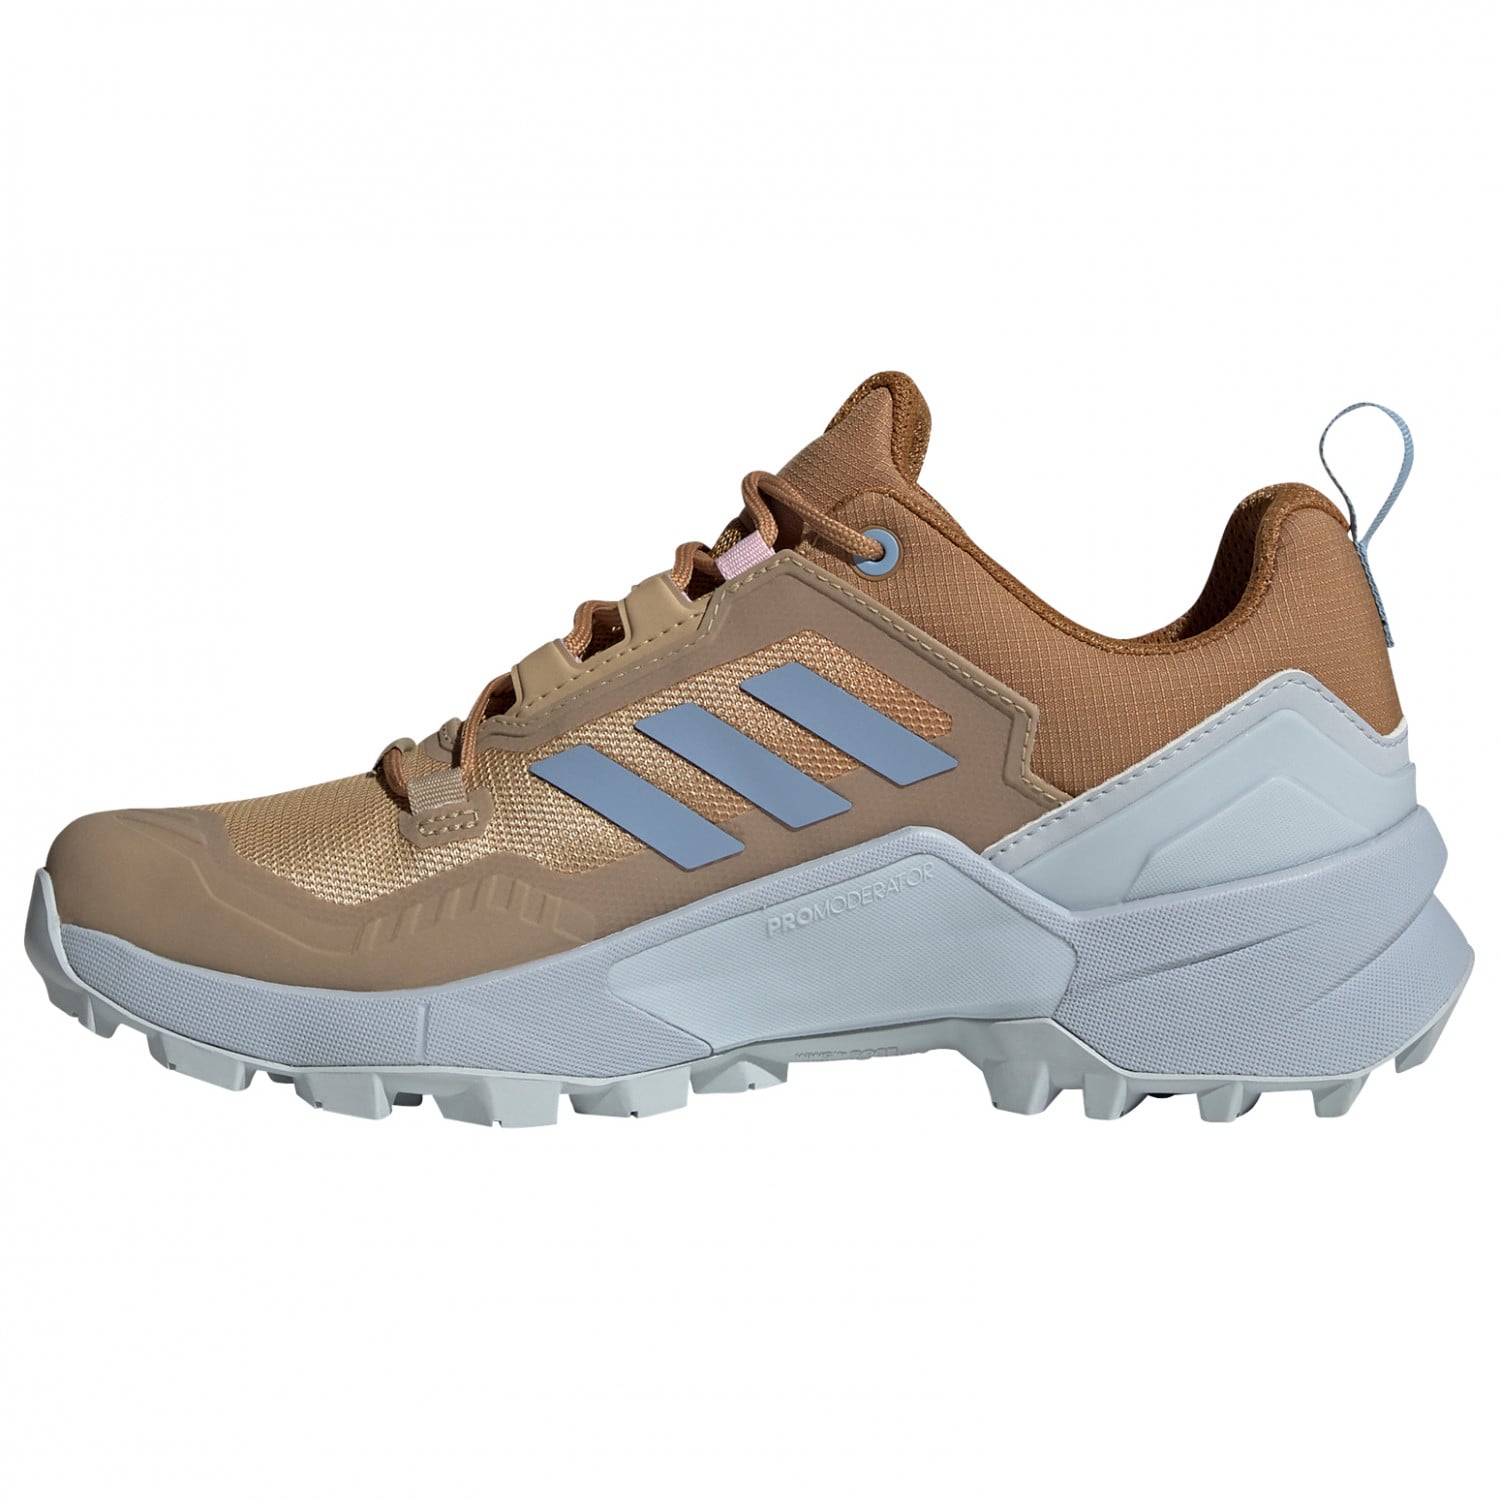 all_About_Adidas_terrex_shoes